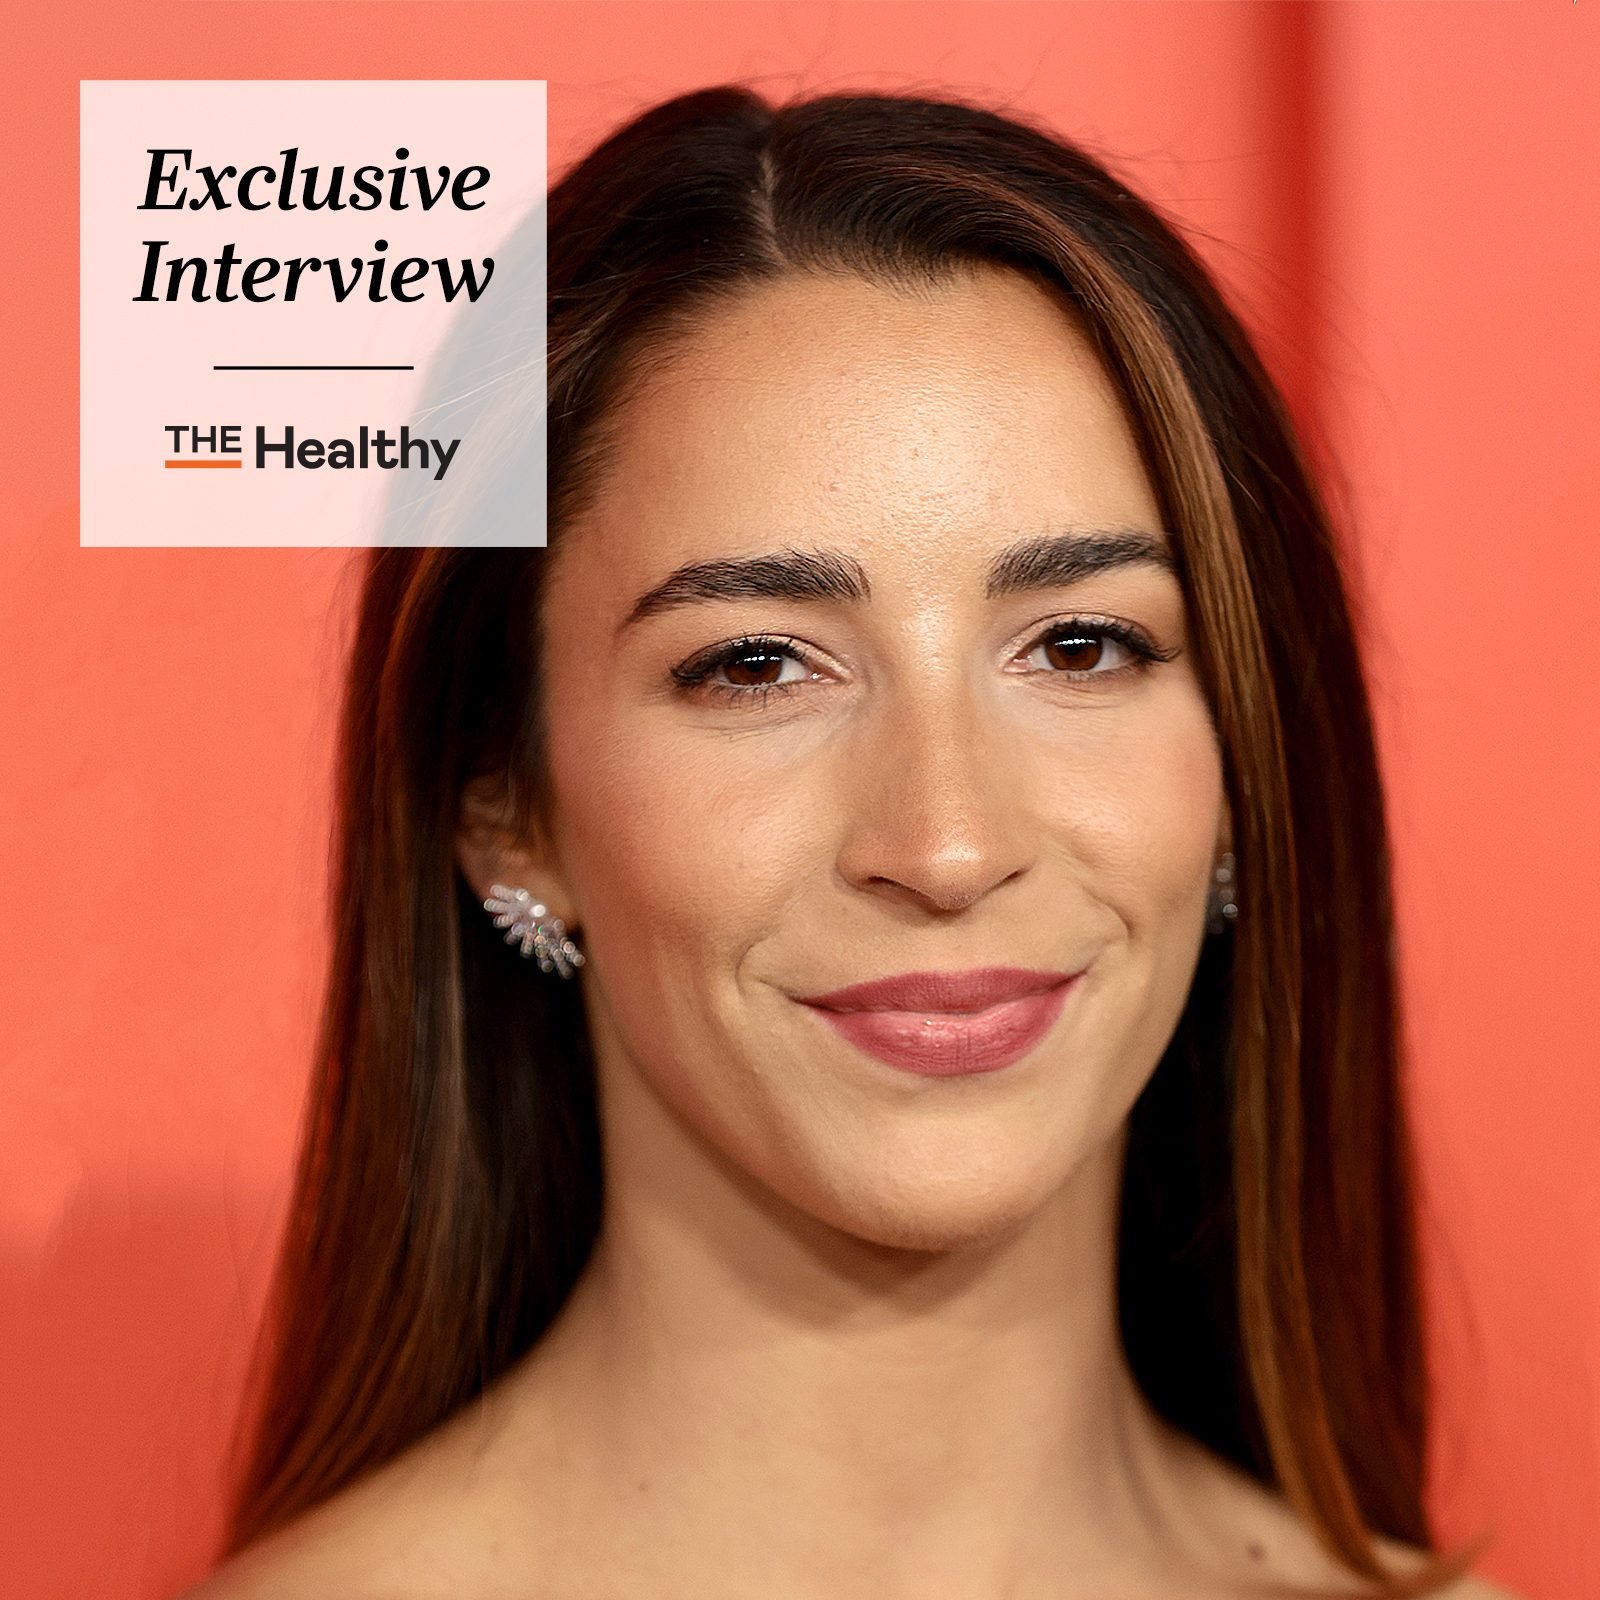 Olympic Gymnast Aly Raisman on Overcoming Trauma and Feeling Healthy Today: 'I'm Just Really Excited to Take Care of Myself'